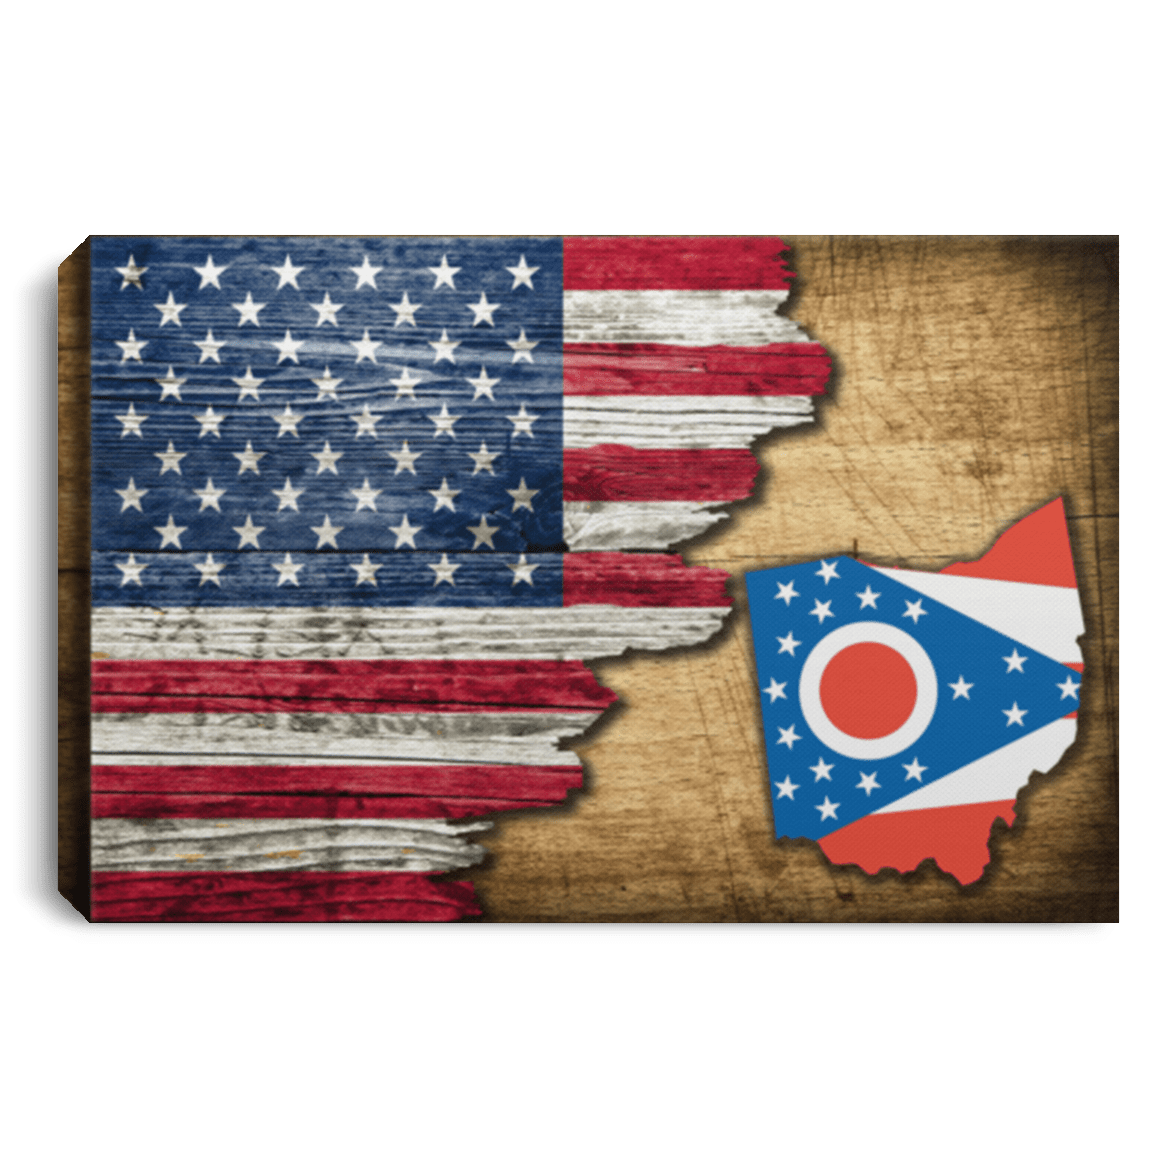 United States/Ohio Flag Ripped Effect 12X8 Inches Landscape Canvas .75In Frame